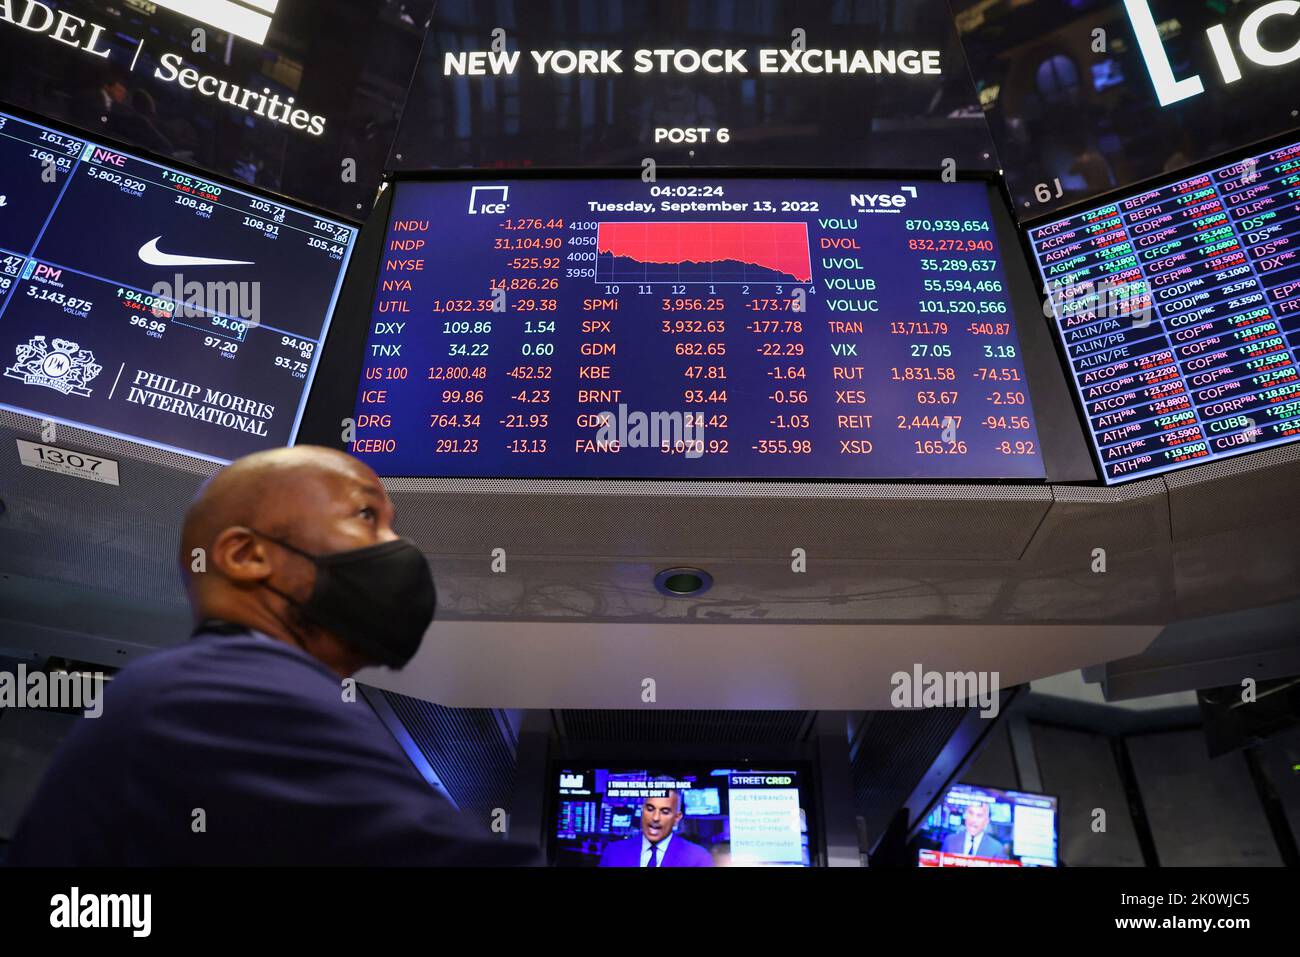 A trader stands beneath a screen on the trading floor displaying the Dow Jones Industrial Average at the New York Stock Exchange (NYSE) in Manhattan, New York City, U.S., September 13, 2022. REUTERS/Andrew Kelly Stock Photo